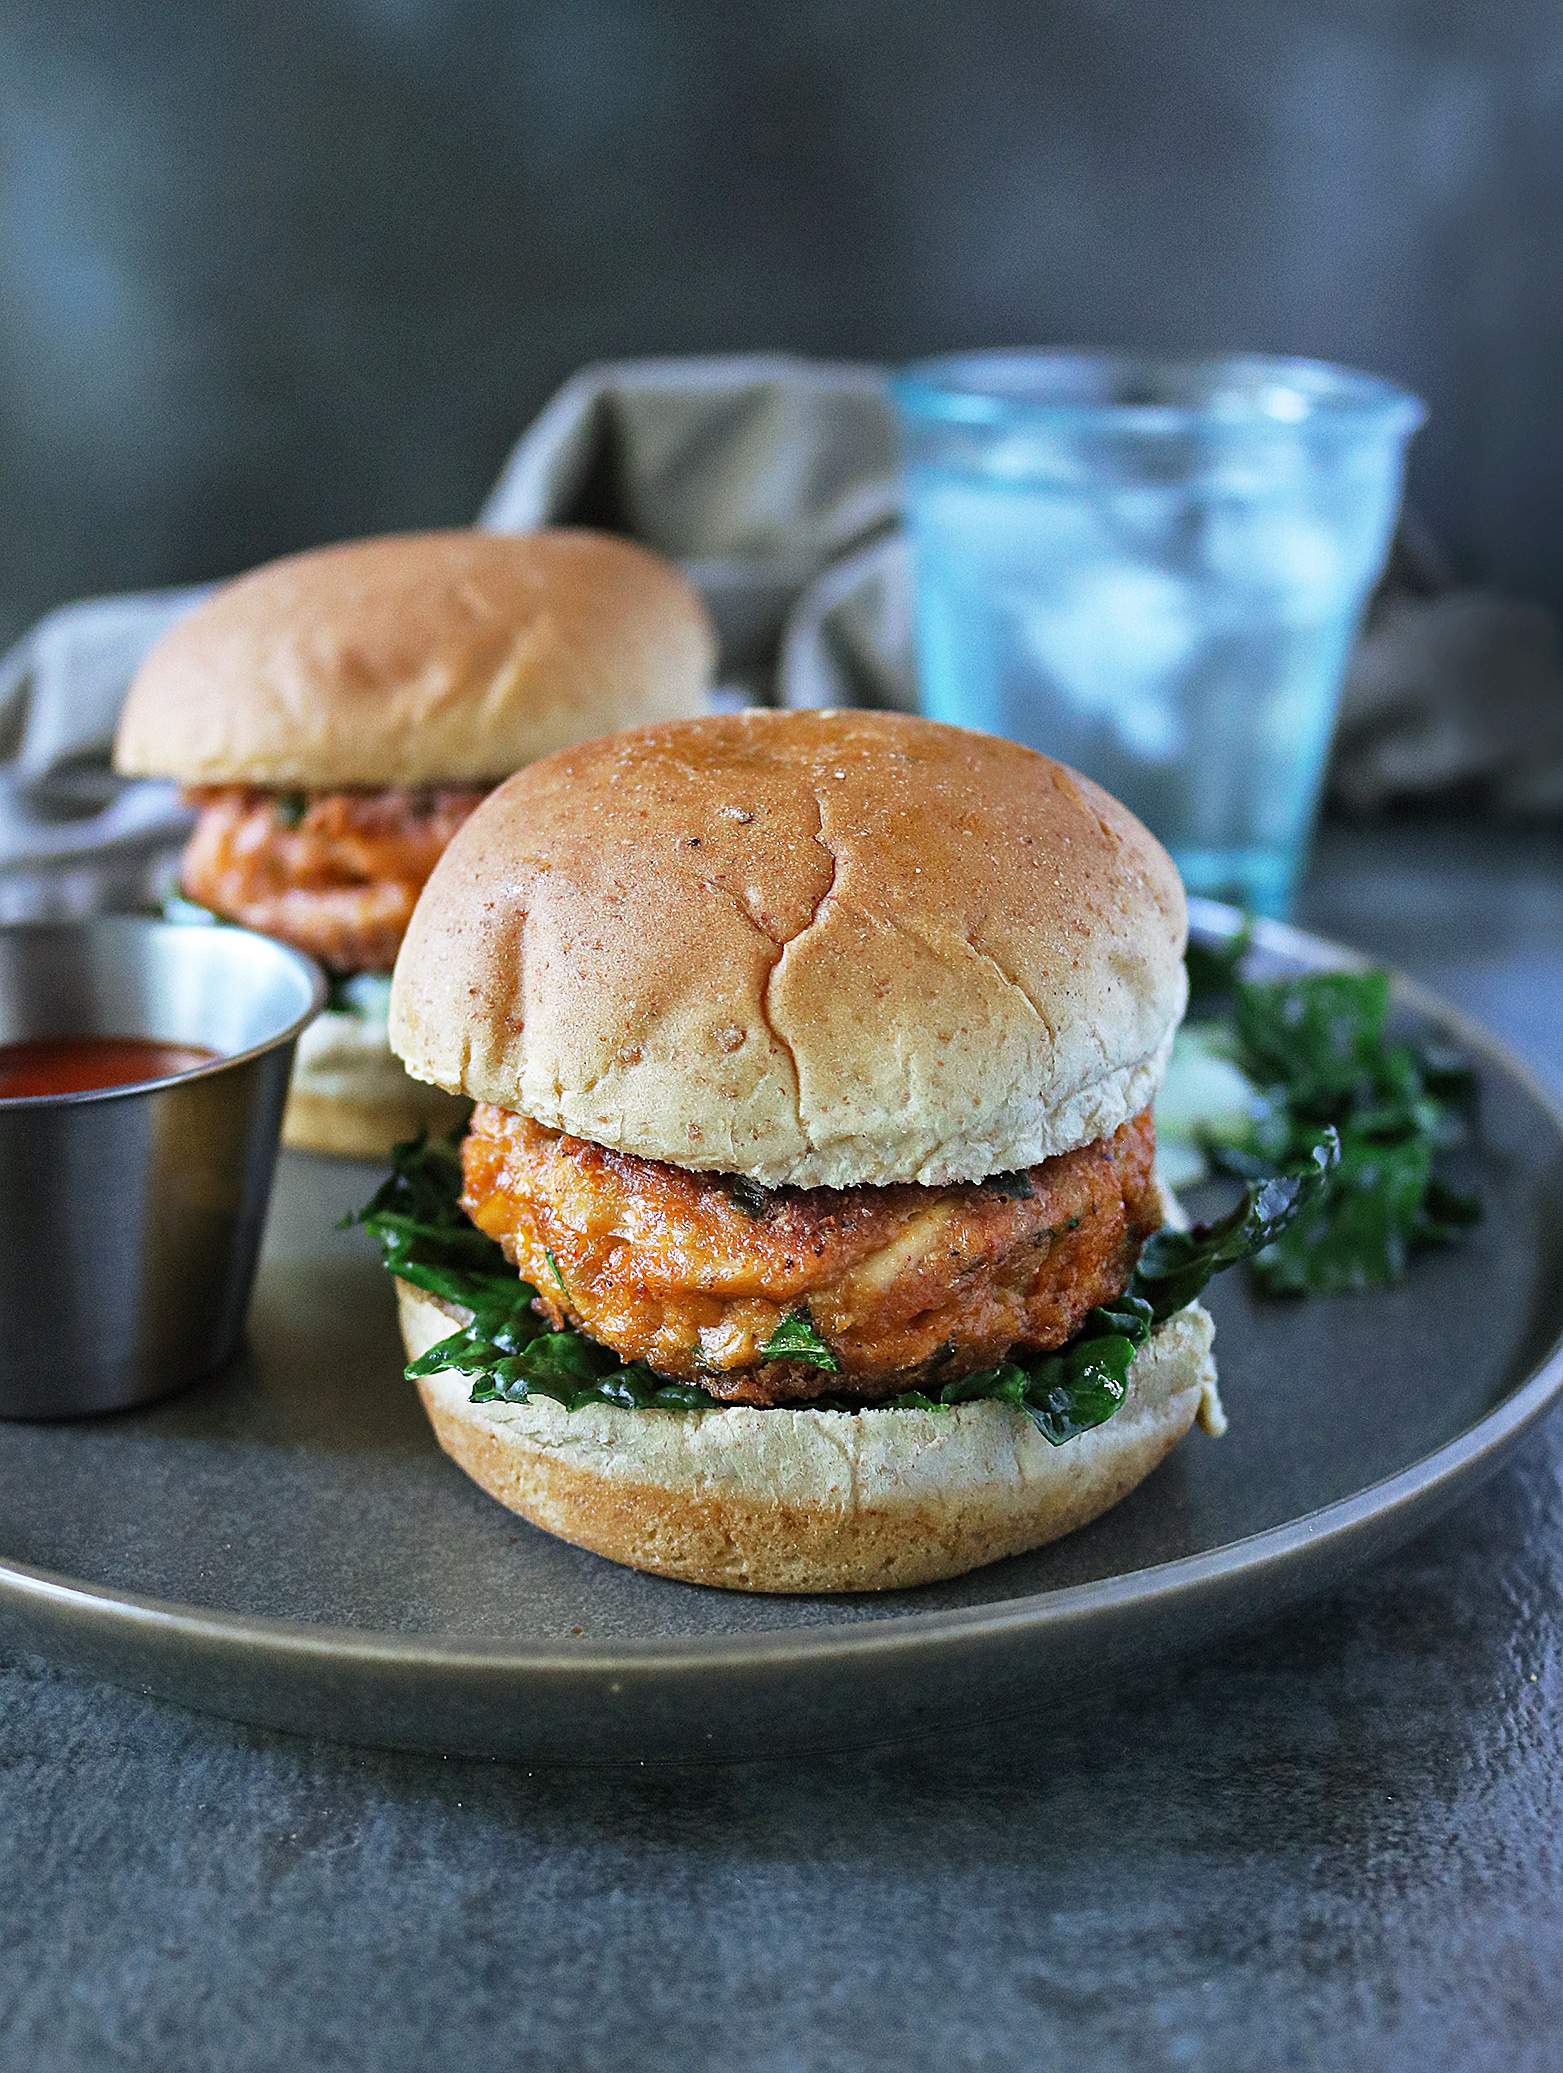 Easy Salmon Burger Recipe (low carb) - Savory Spin